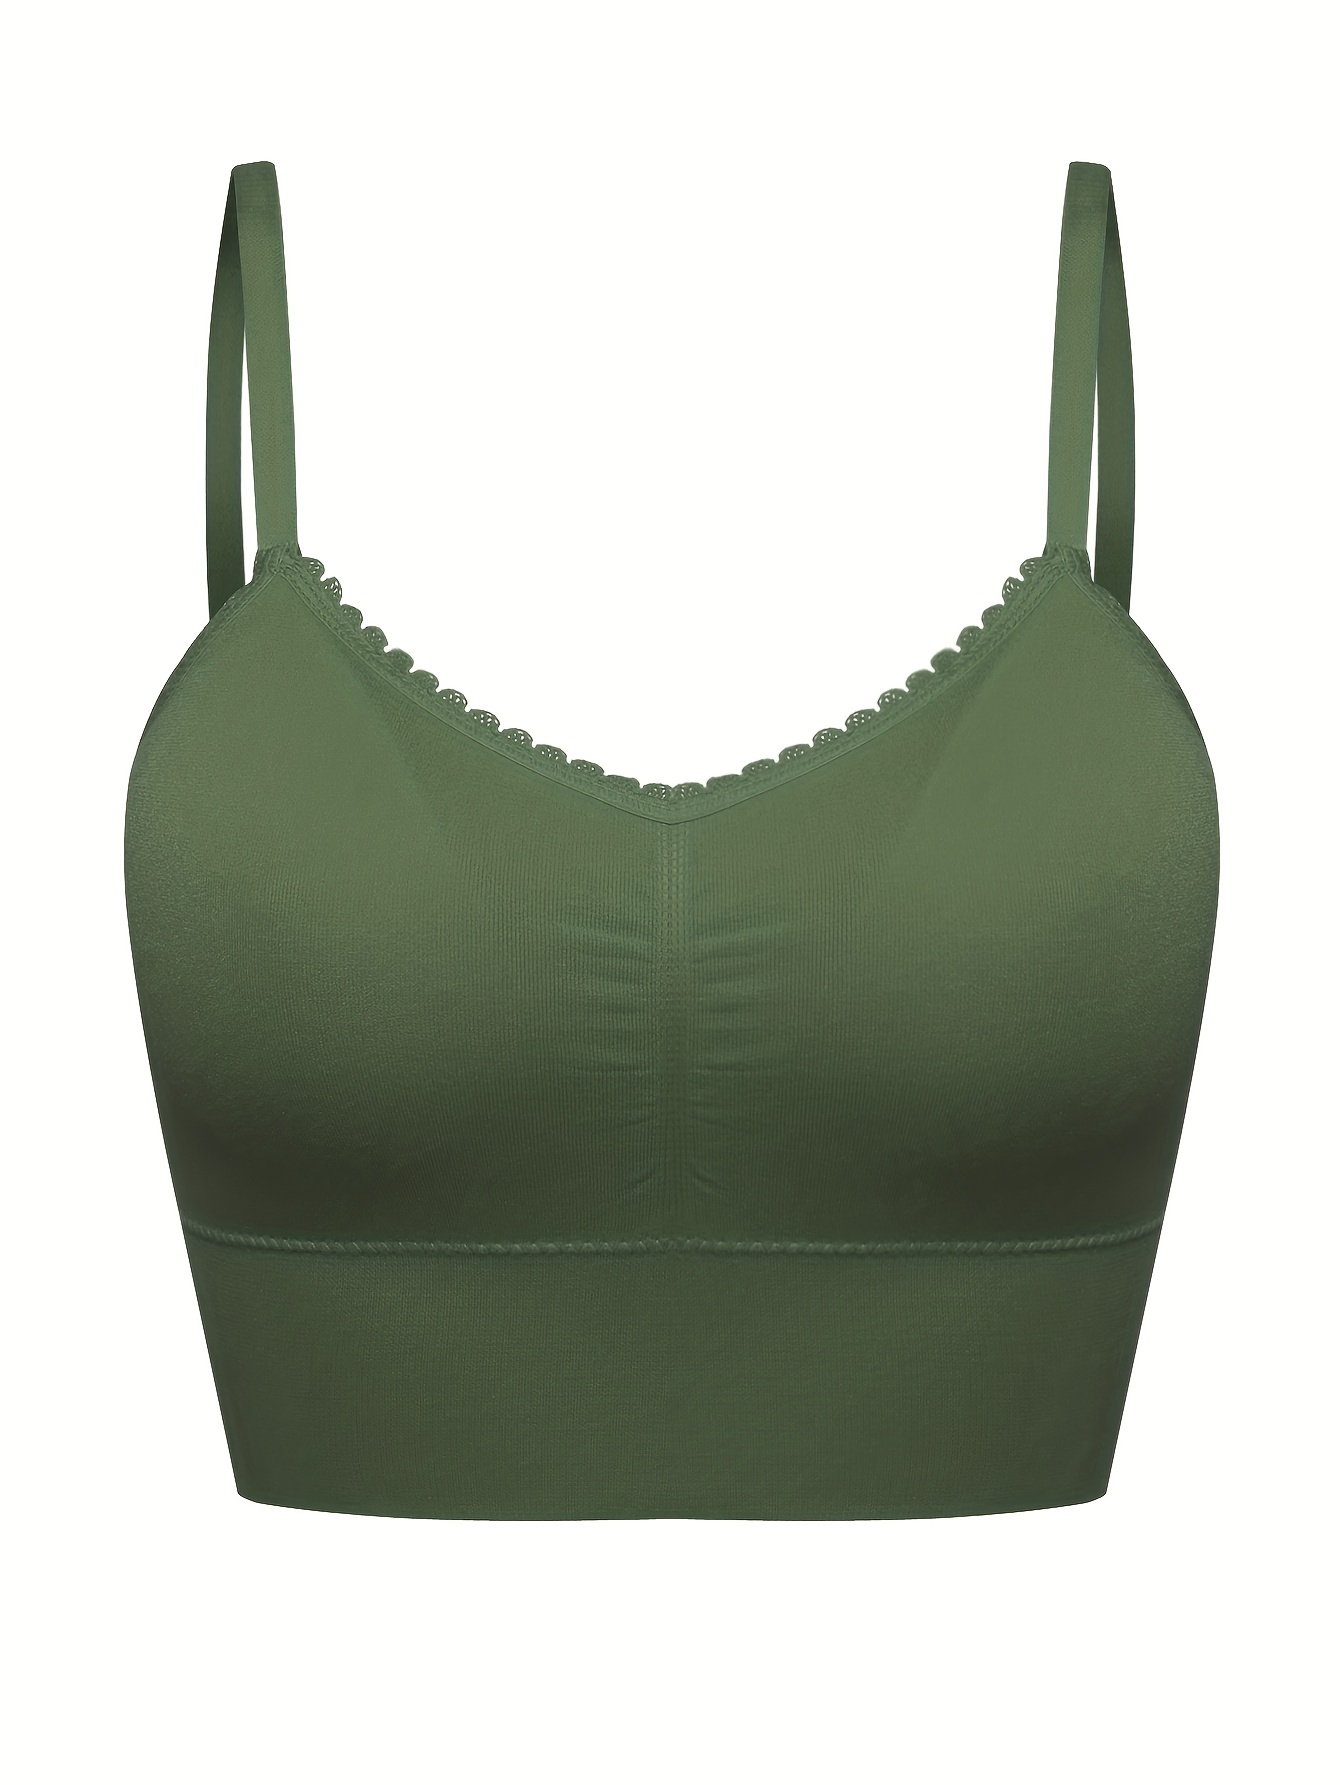 Plus Size Seamless Wireless Sleep And Sports Bra For Women, Thin,  Comfortable, No Constraints, Push Up Bra To Show Small Breasts